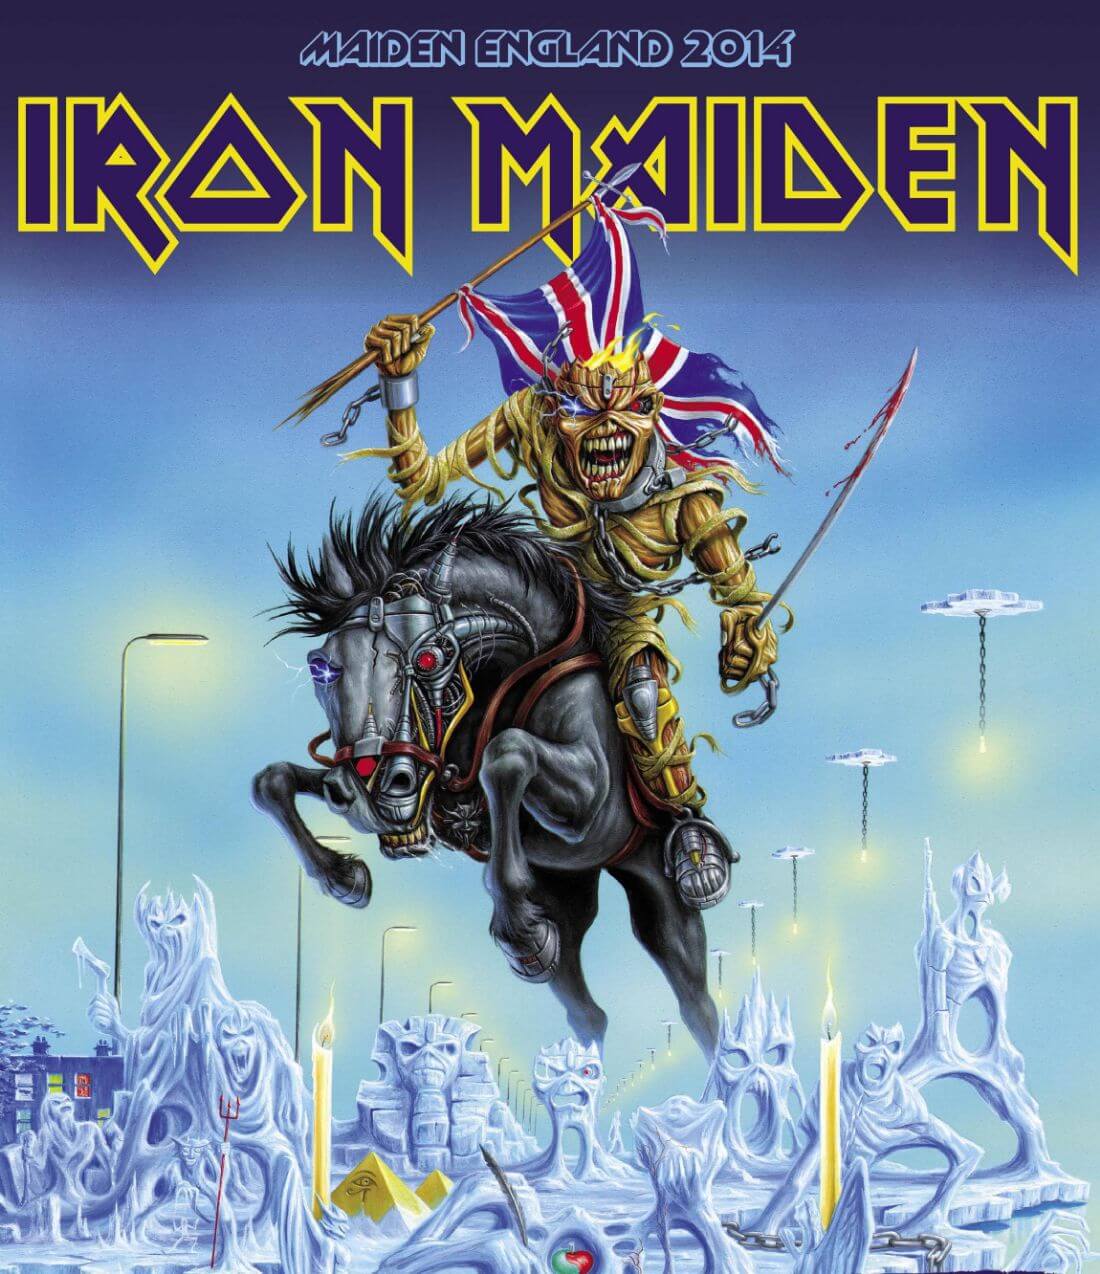 Iron Maiden Band Poster